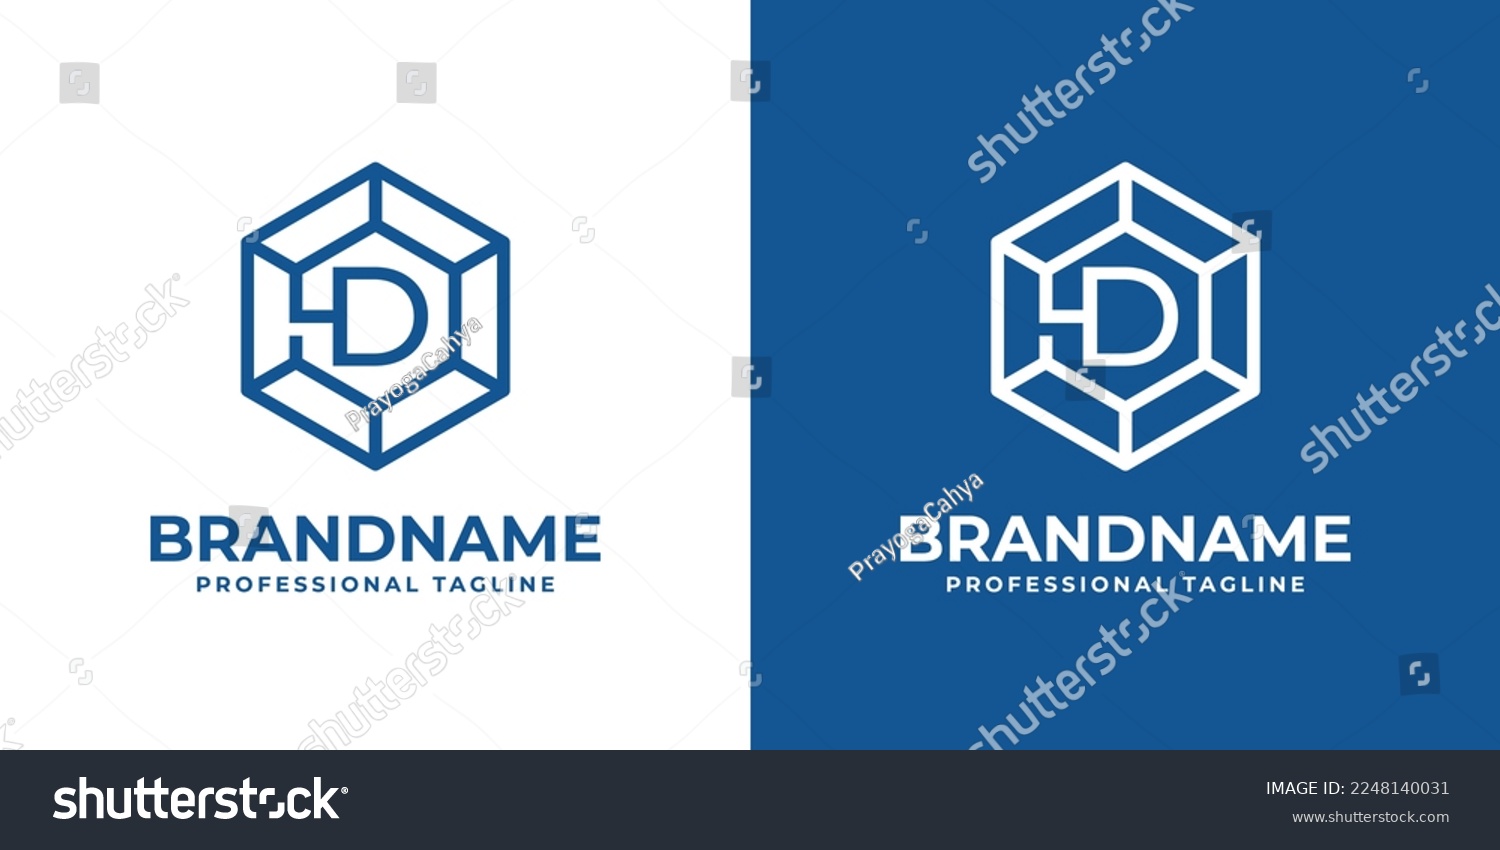 SVG of Initial D Hexagon Diamond Logo, suitable for any business with D initial. svg